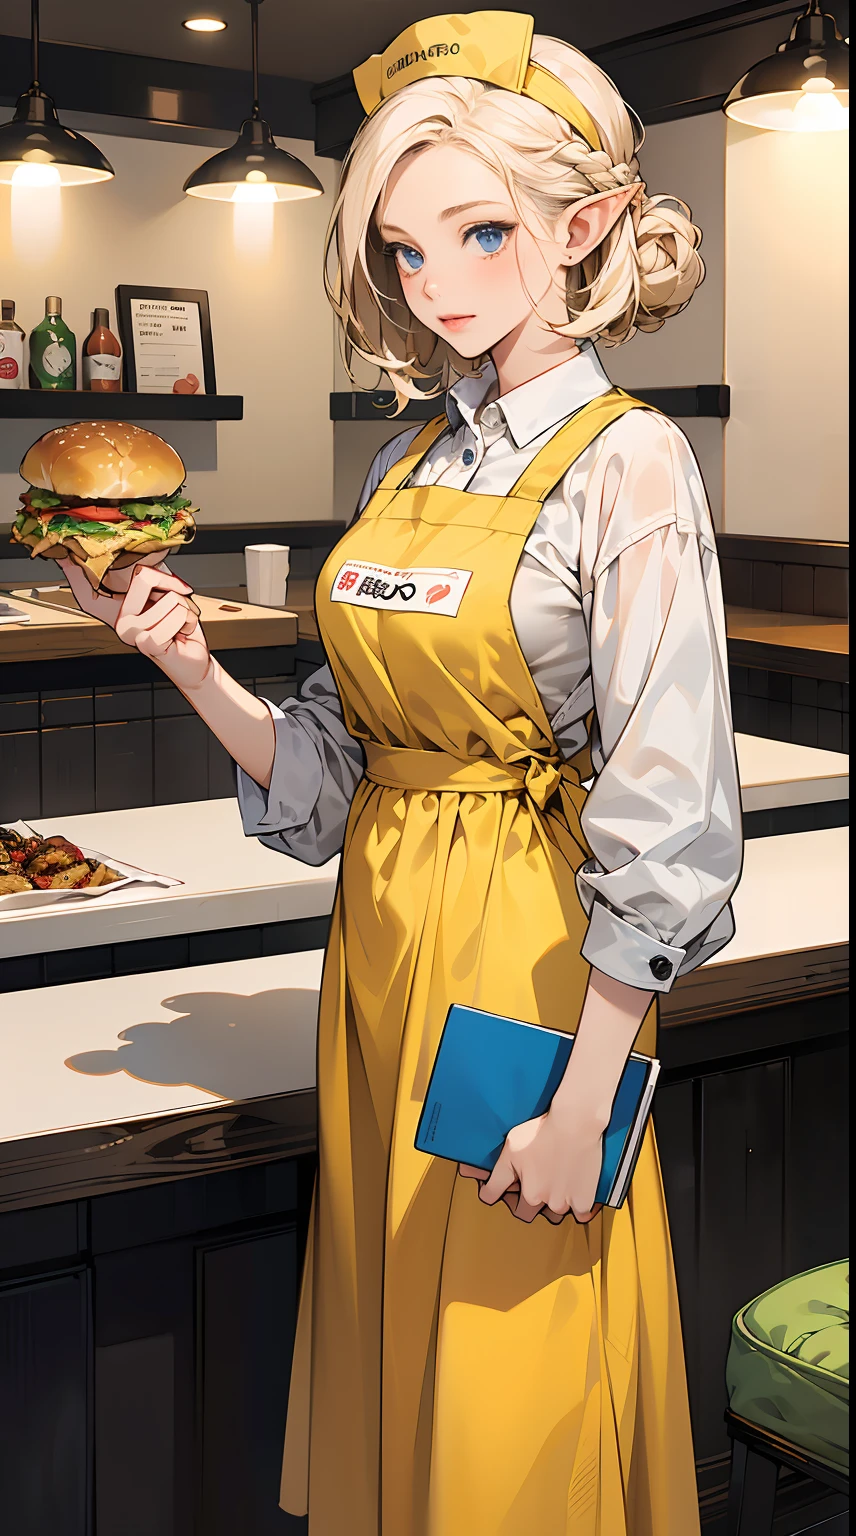 (masterpiece), best quality, expressive eyes, perfect face, (1elf girl working at a fast food restaurant), ((wearing a yellow and red apron and a food service hat)), (standing behind the cash register with the menu on the board behind her), paint on her fingers, a large soda cup sitting next to her on the counter, ((clean and colorful restaurant interior)), asymmetrical bangs, Braid Bun hair, short hair, Perfect lips, (white blonde hair, Deep Blue Eyes:1.2), Gentle expression. By Yusuke Murata.